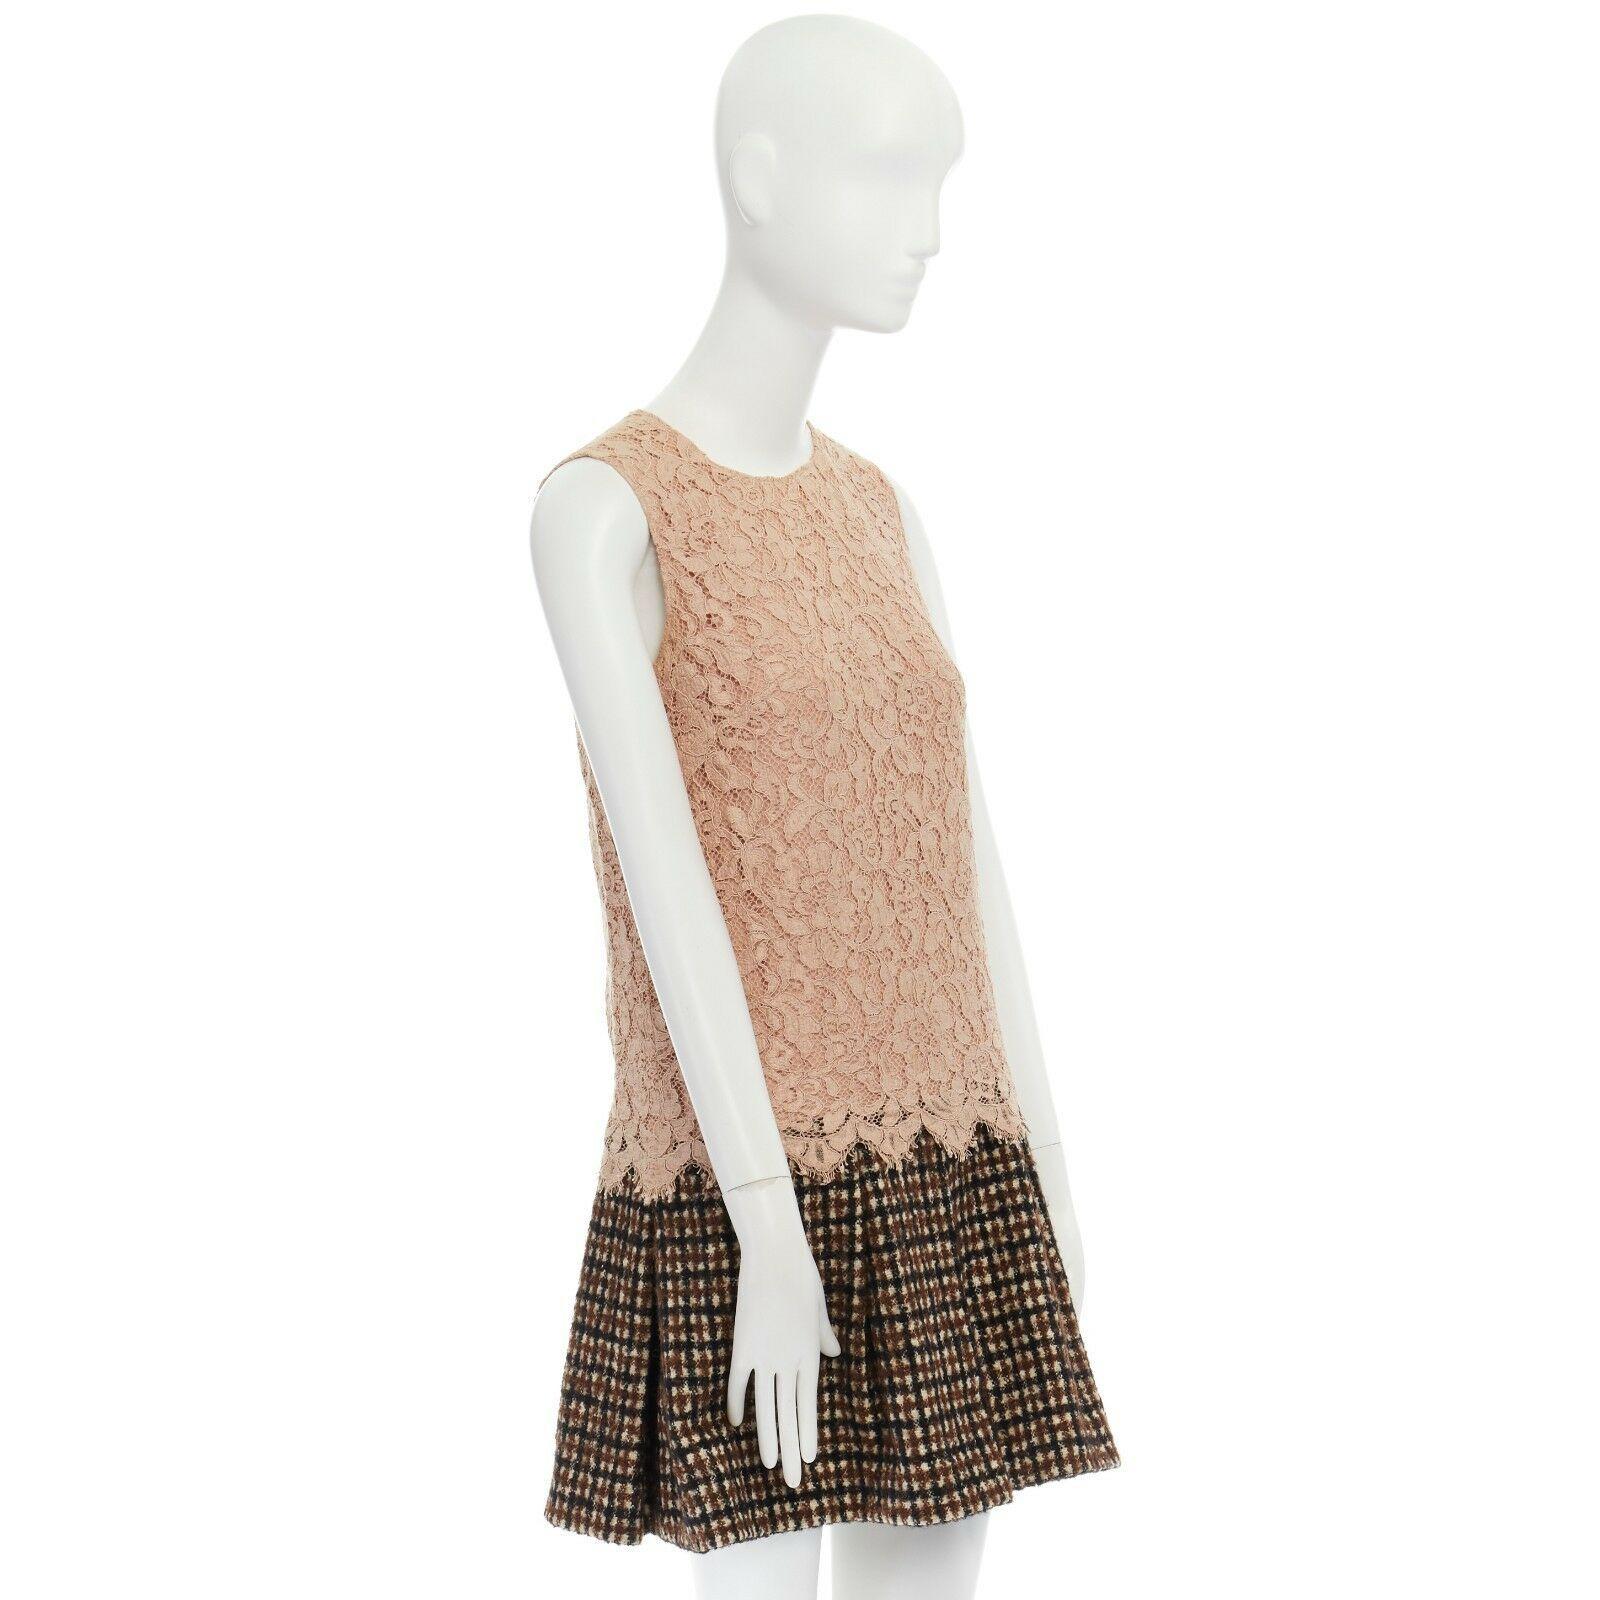 Women's DOLCE GABBANA nude floral lace brown checked wool boucle skirt cocktail dress S